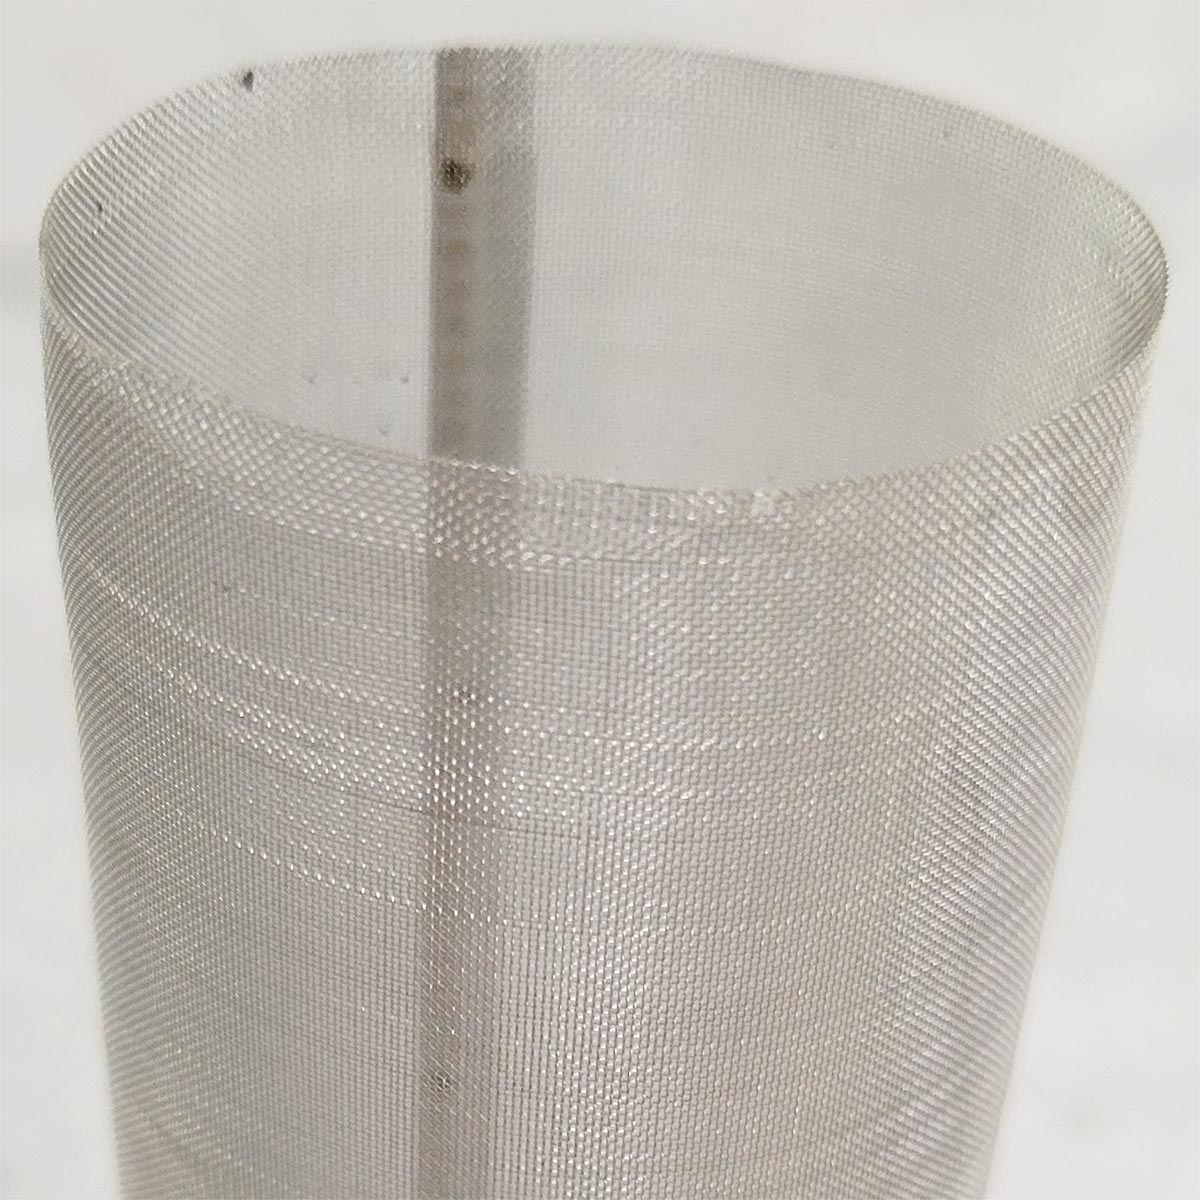 zoomed in view of a cylindrical mesh filter